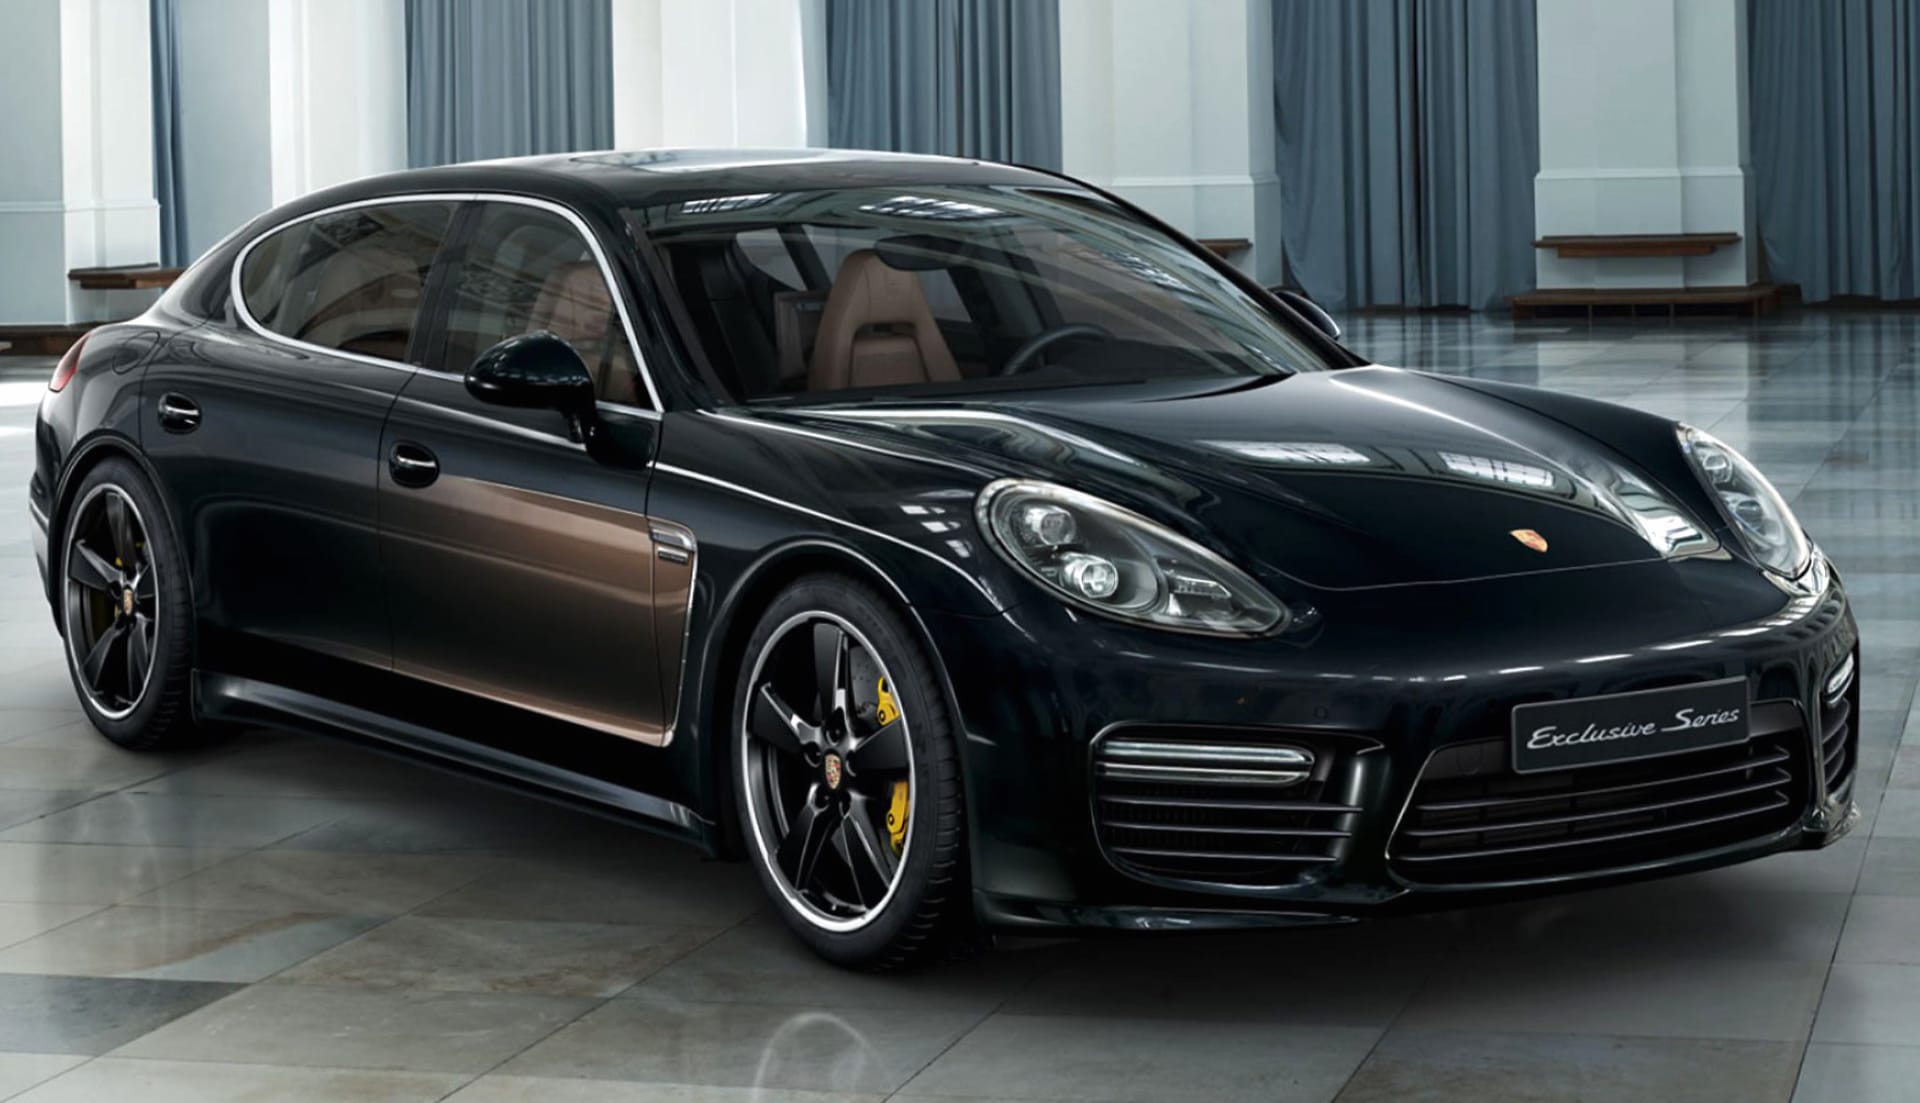 Porsche Panamera Turbo S Executive Exclusive Series wallpapers HD quality